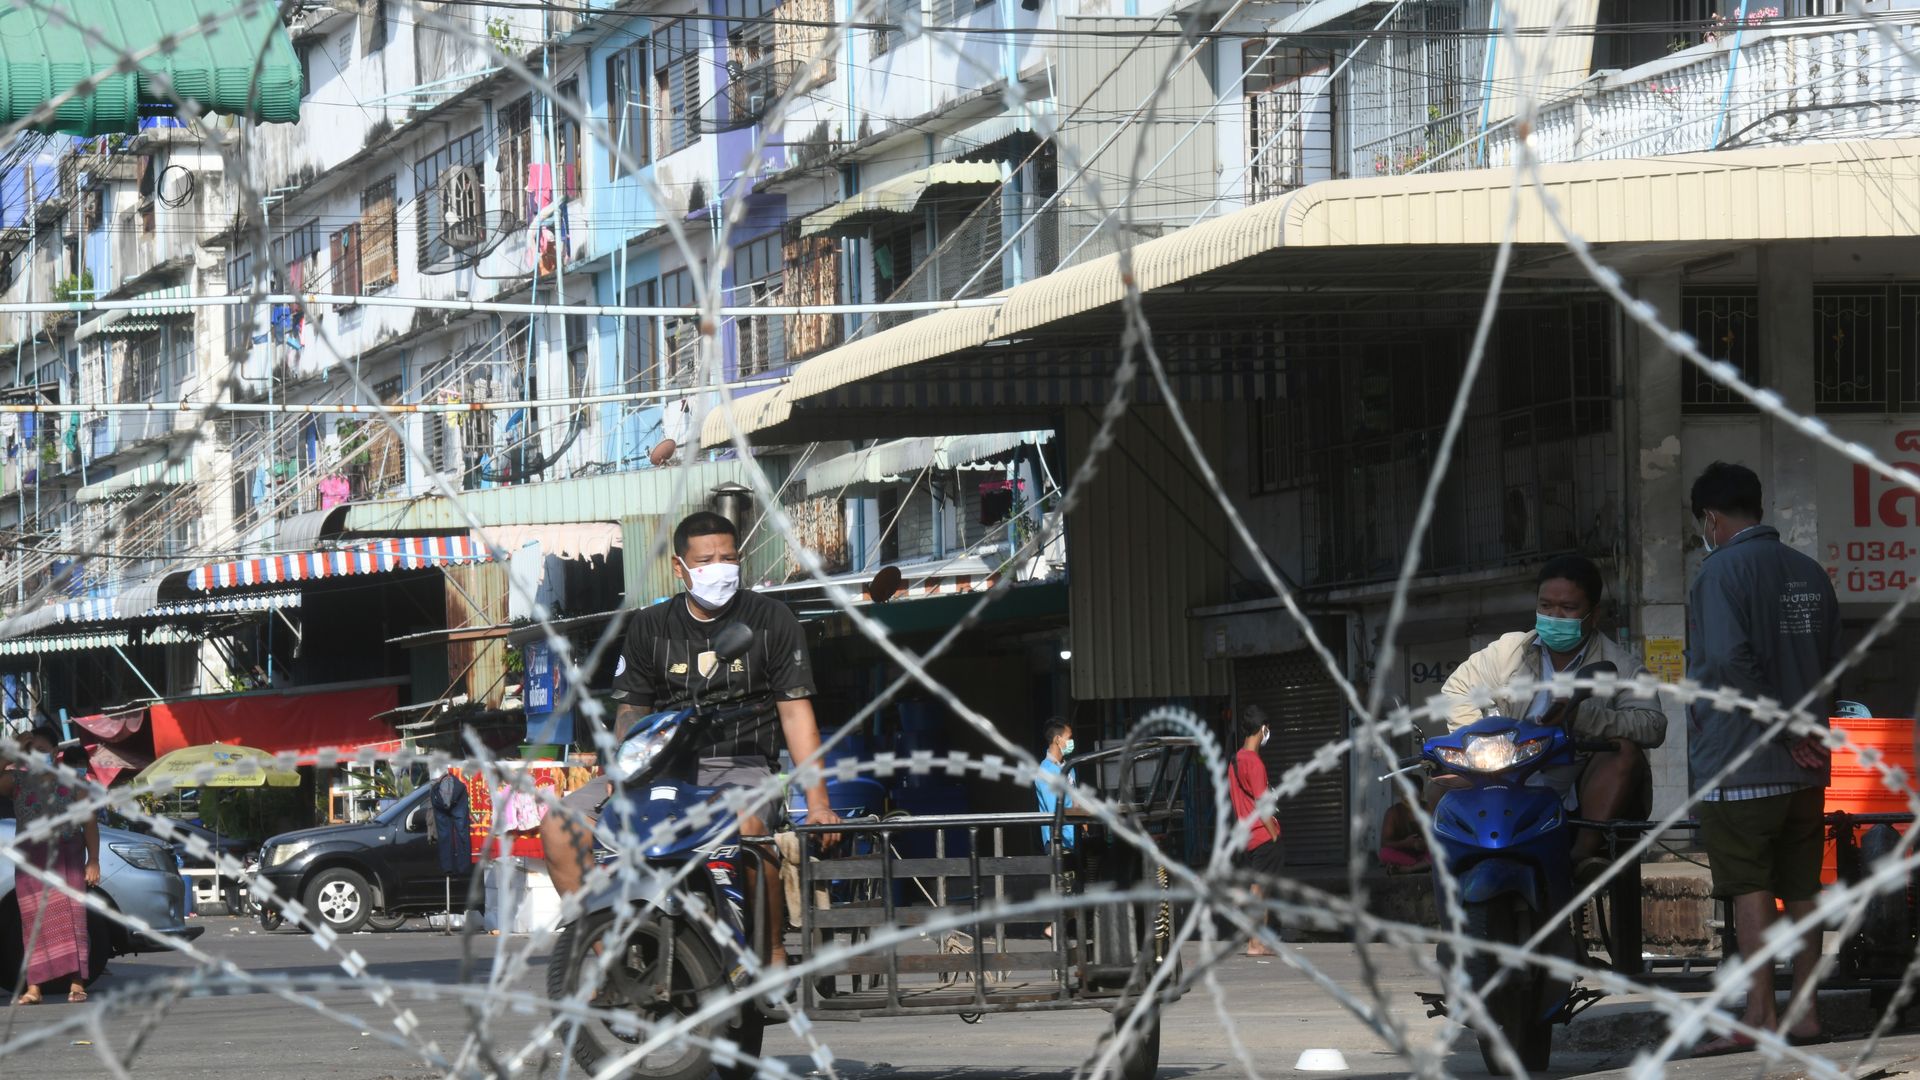 People are seen in the lockdown area near a seafood market in Samut Sakhon, Thailand, Dec. 20